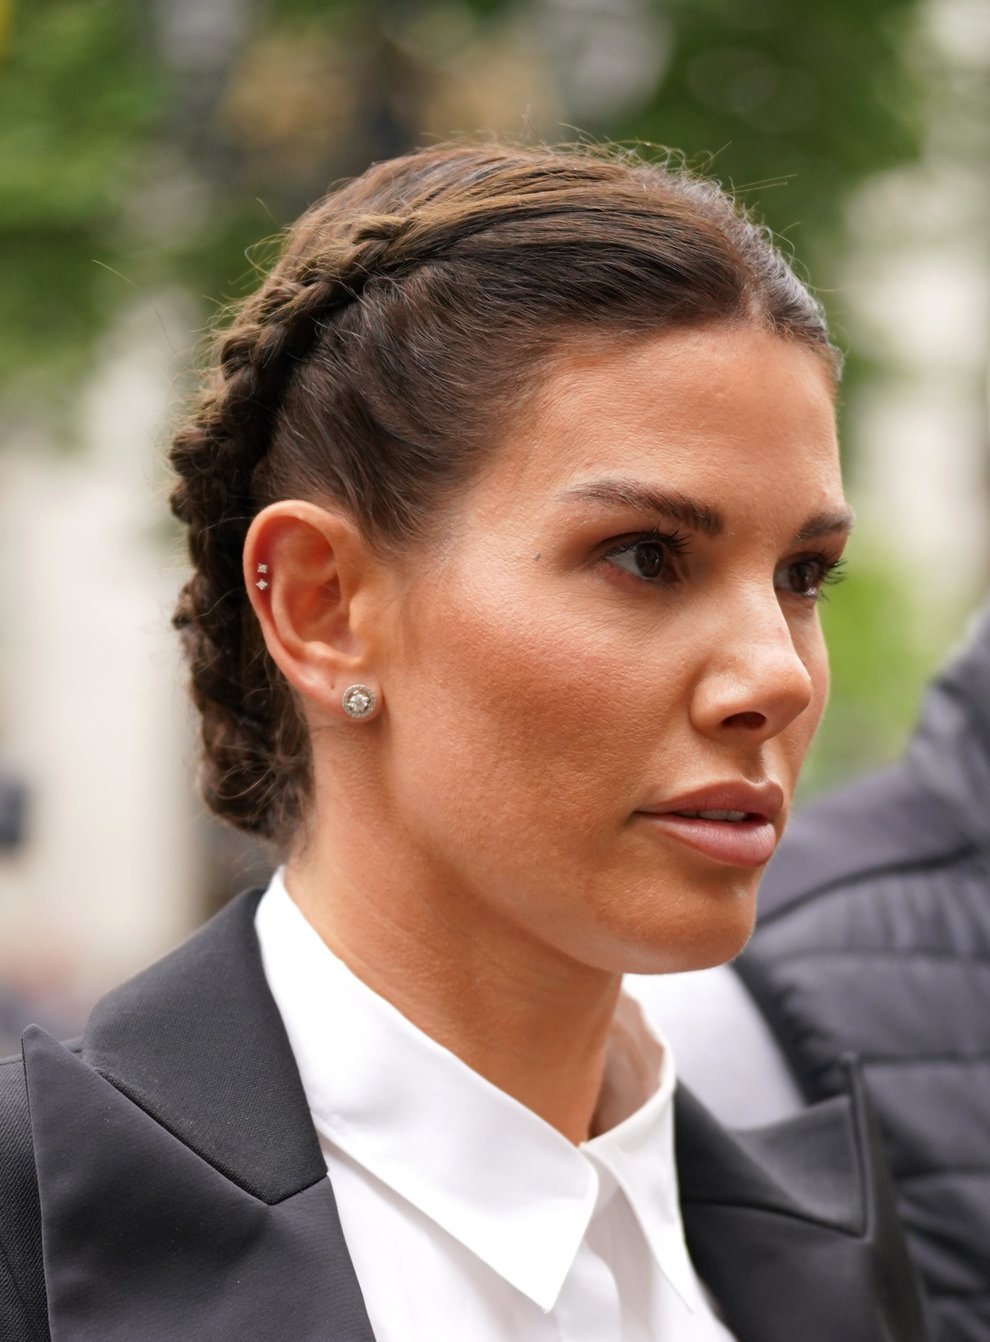 Rebekah Vardy arriving at the Royal Courts Of Justice in London, as her high-profile libel battle with Coleen Rooney continued (Yui Mok/PA)